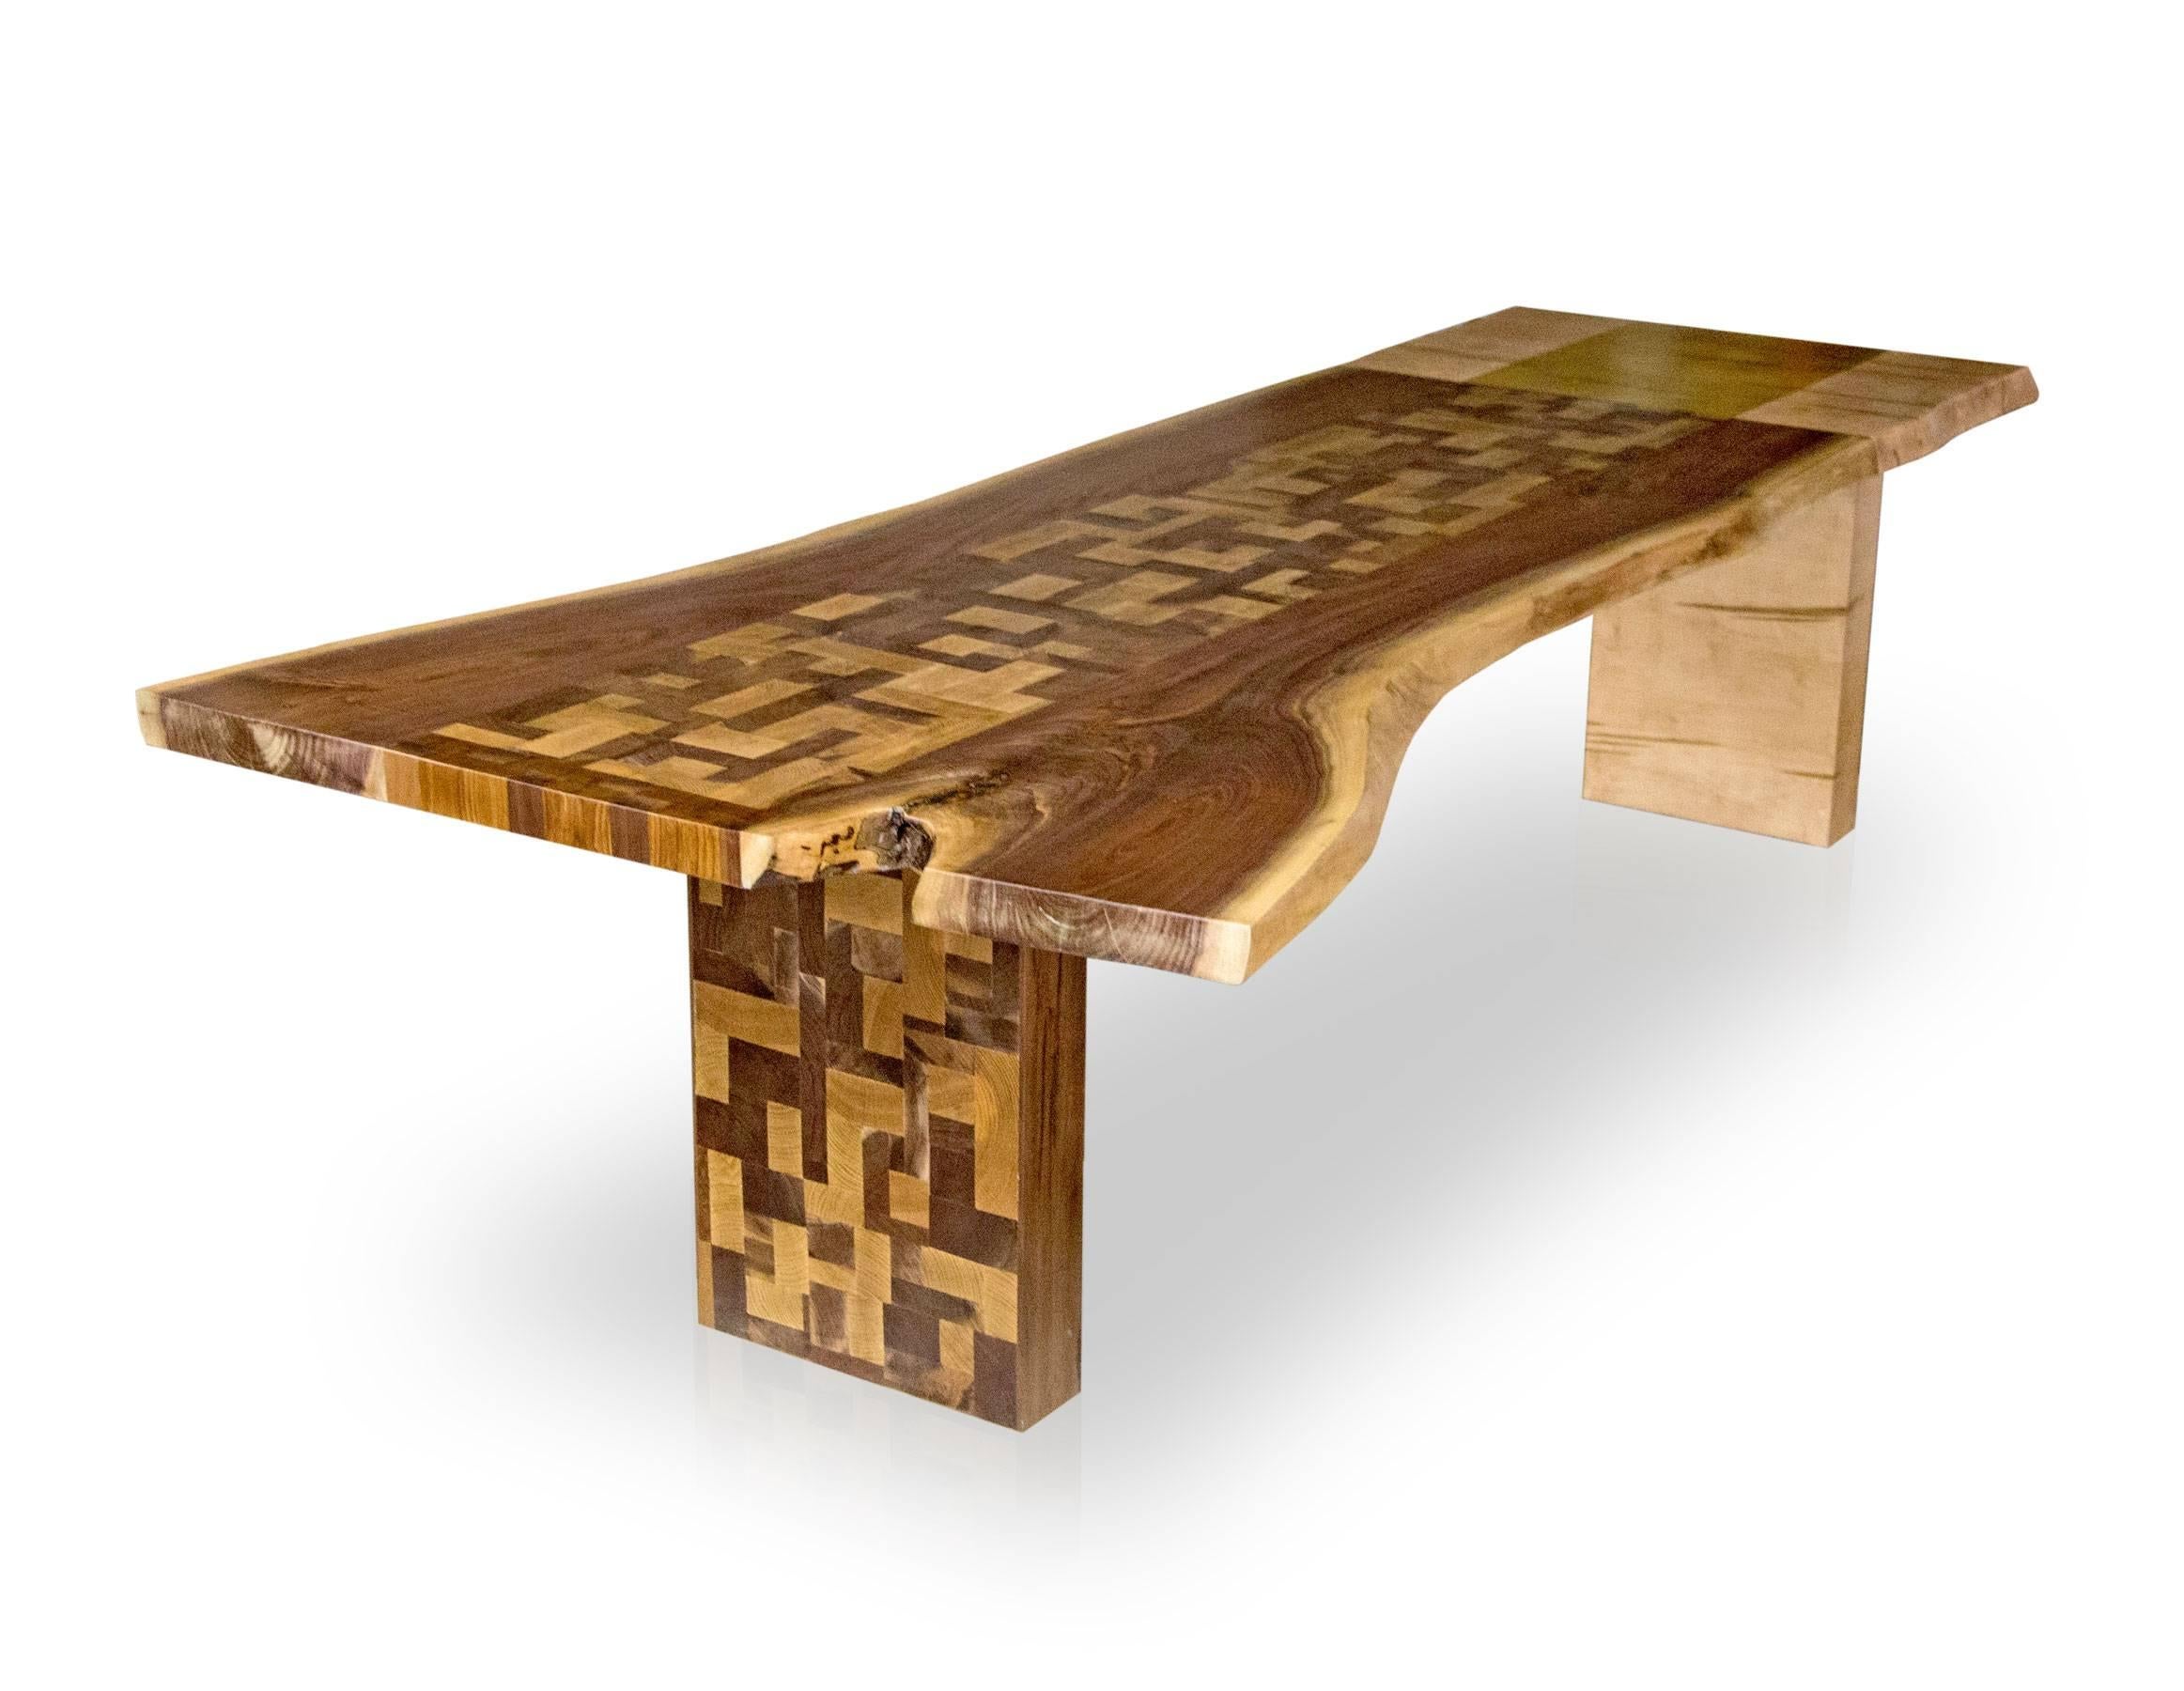 One off, one of a kind mosaic table combining walnut and maple in an artistic design. The pattern of blocked engrain walnut and gold strip down the center of the table contrasts and creates an interesting harmony between the two wood types. The